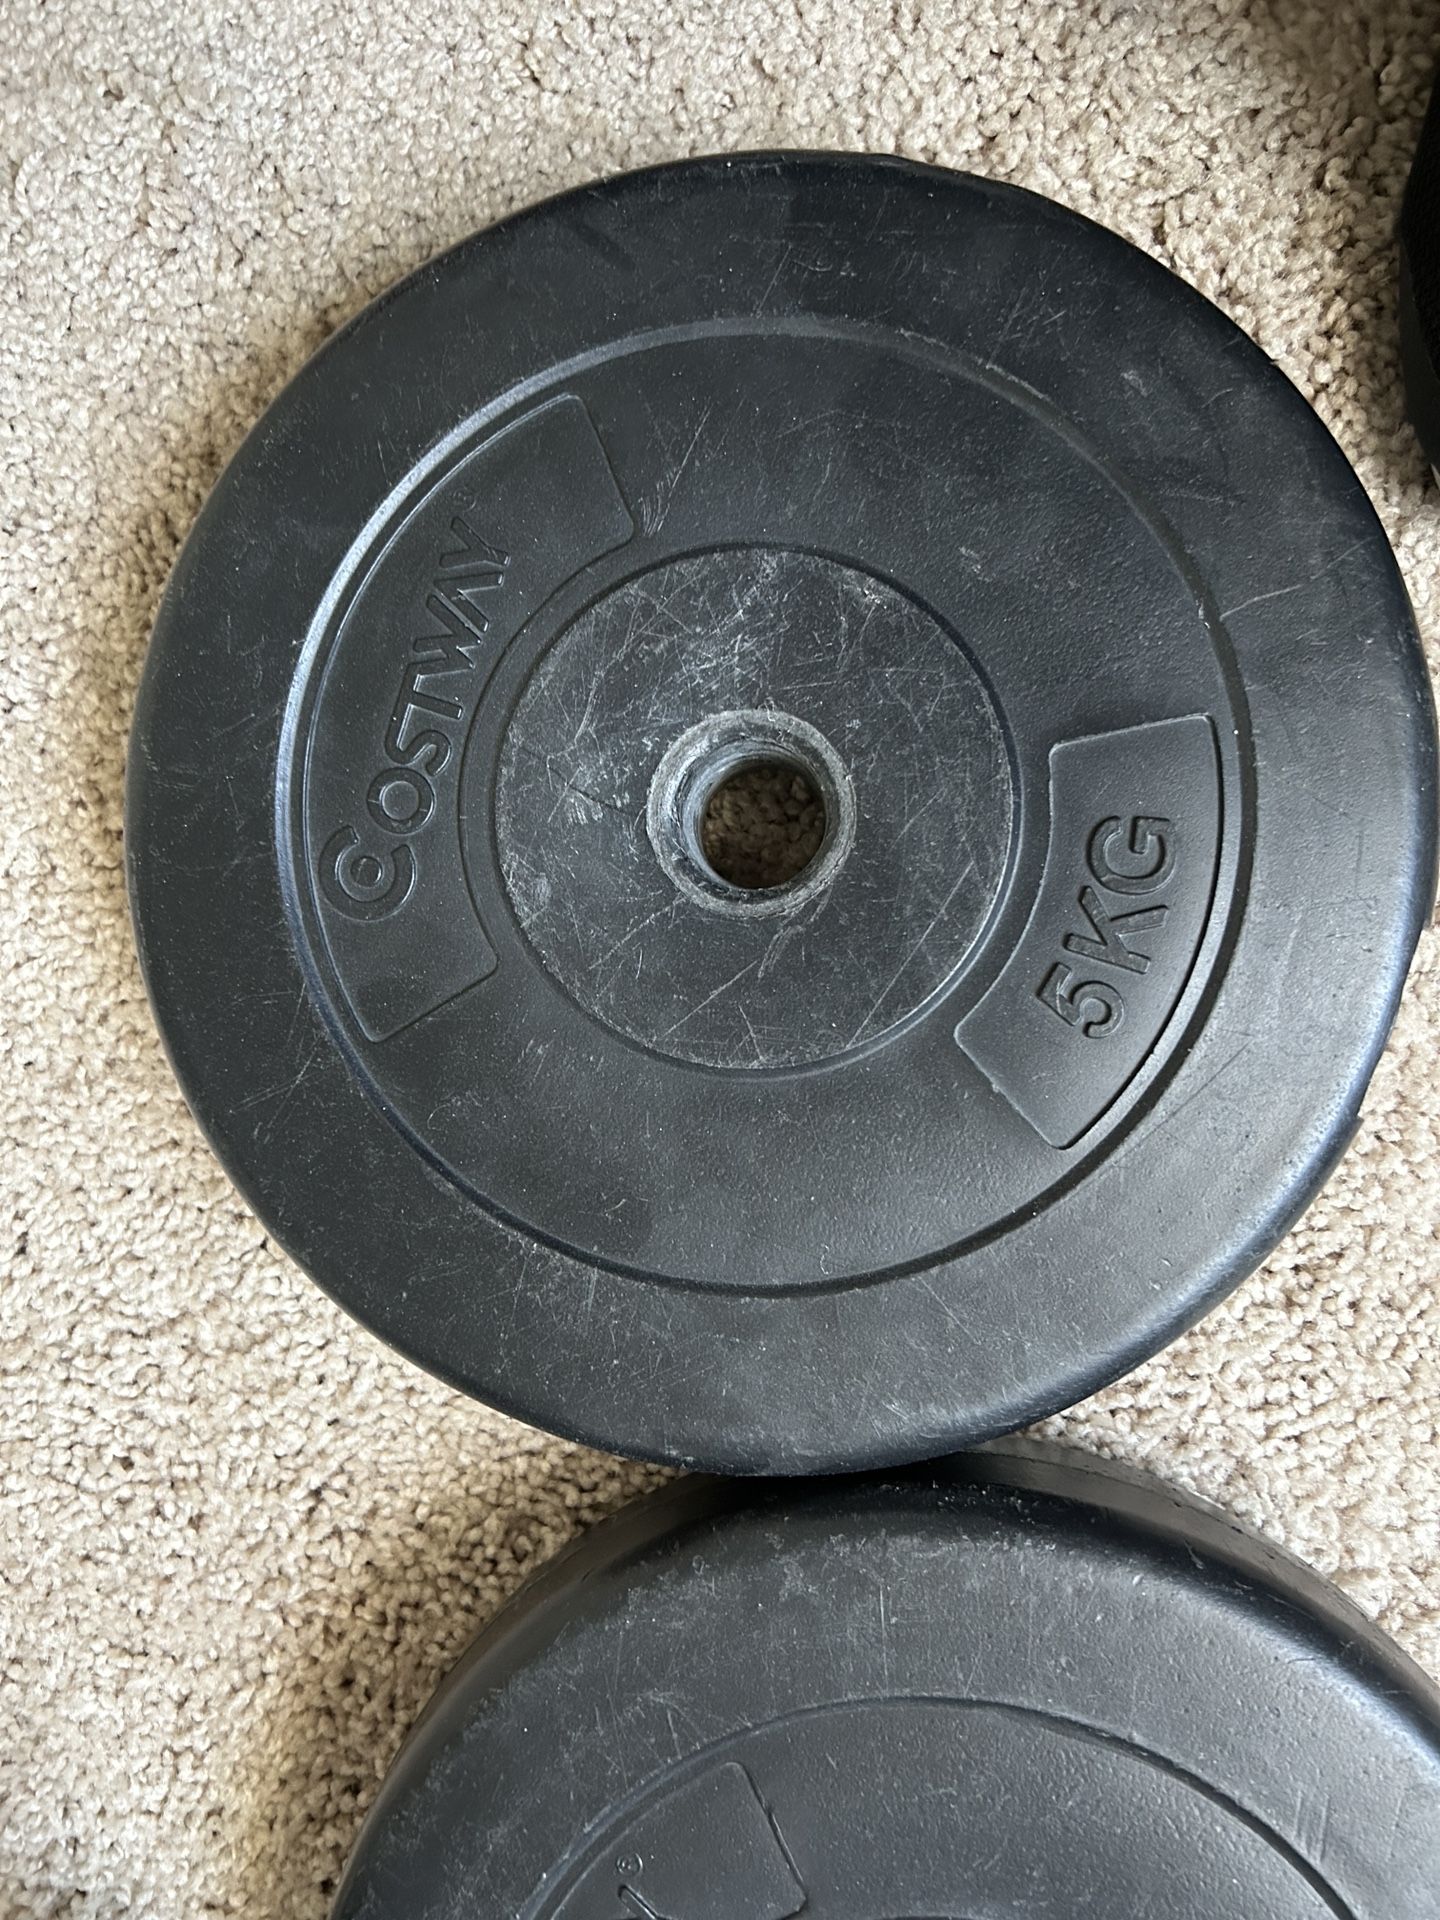 2- 5 Kg weights, can Use With The Dumbbell